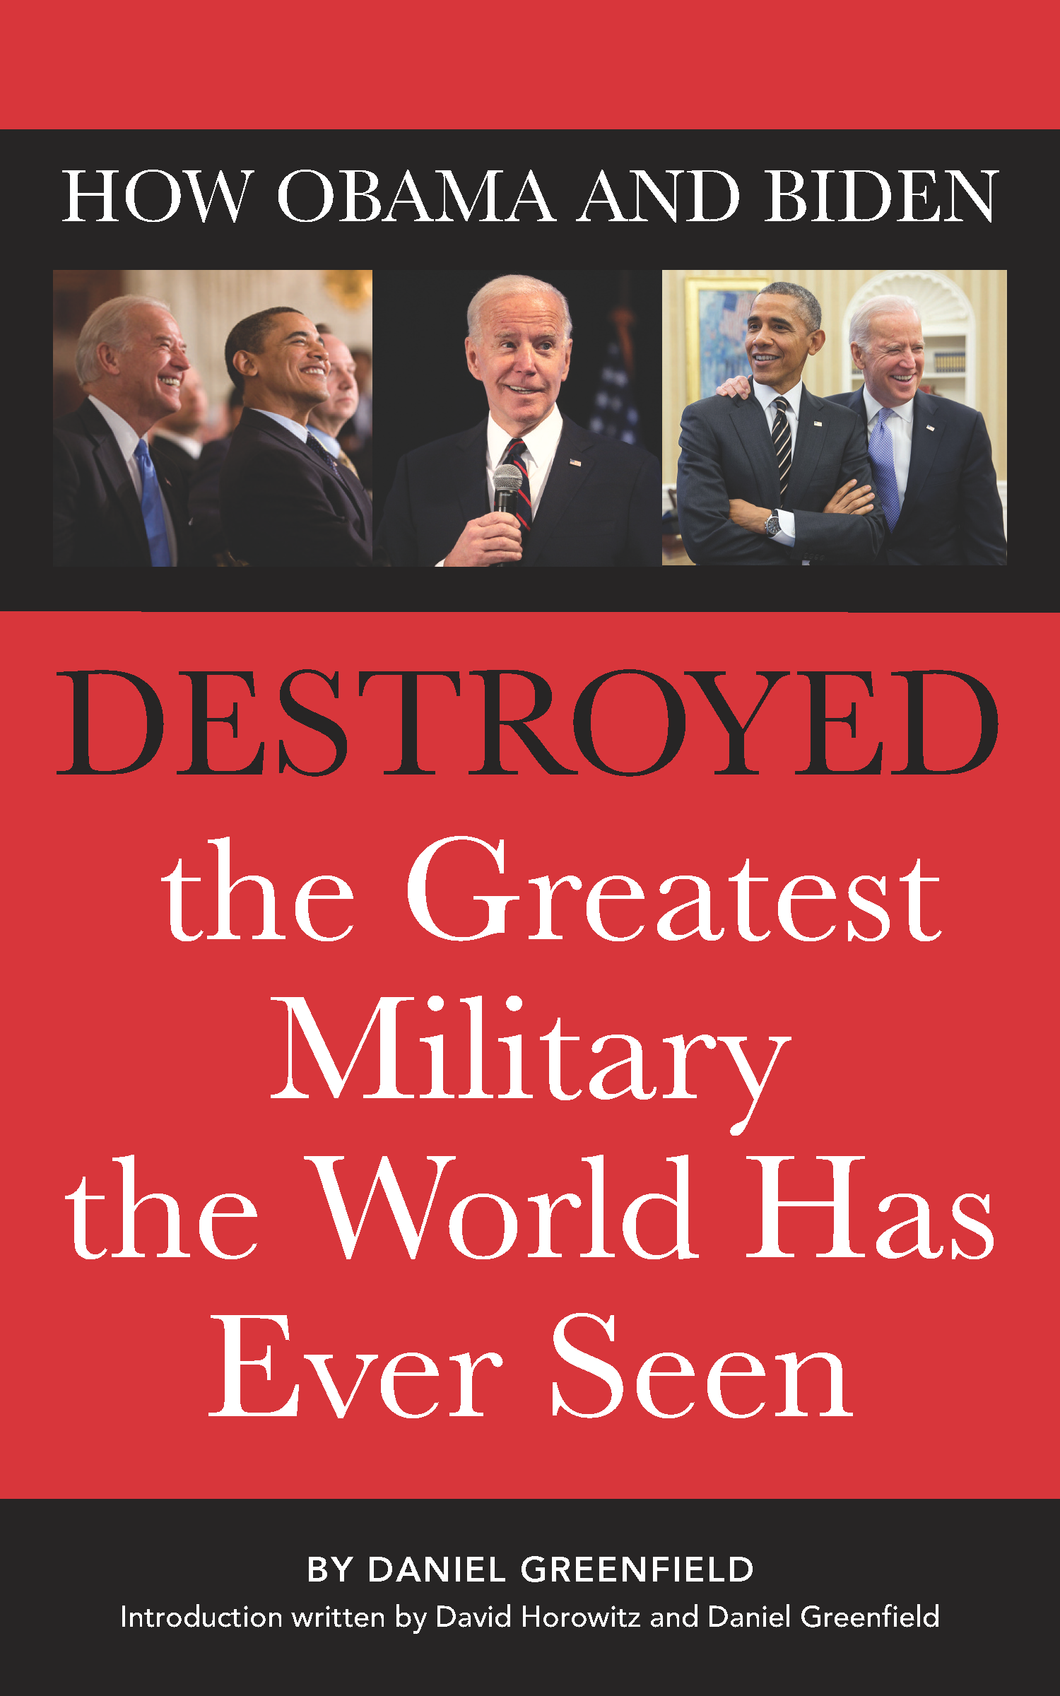 How Obama and Biden Destroyed the Greatest Military the World Has Ever Seen